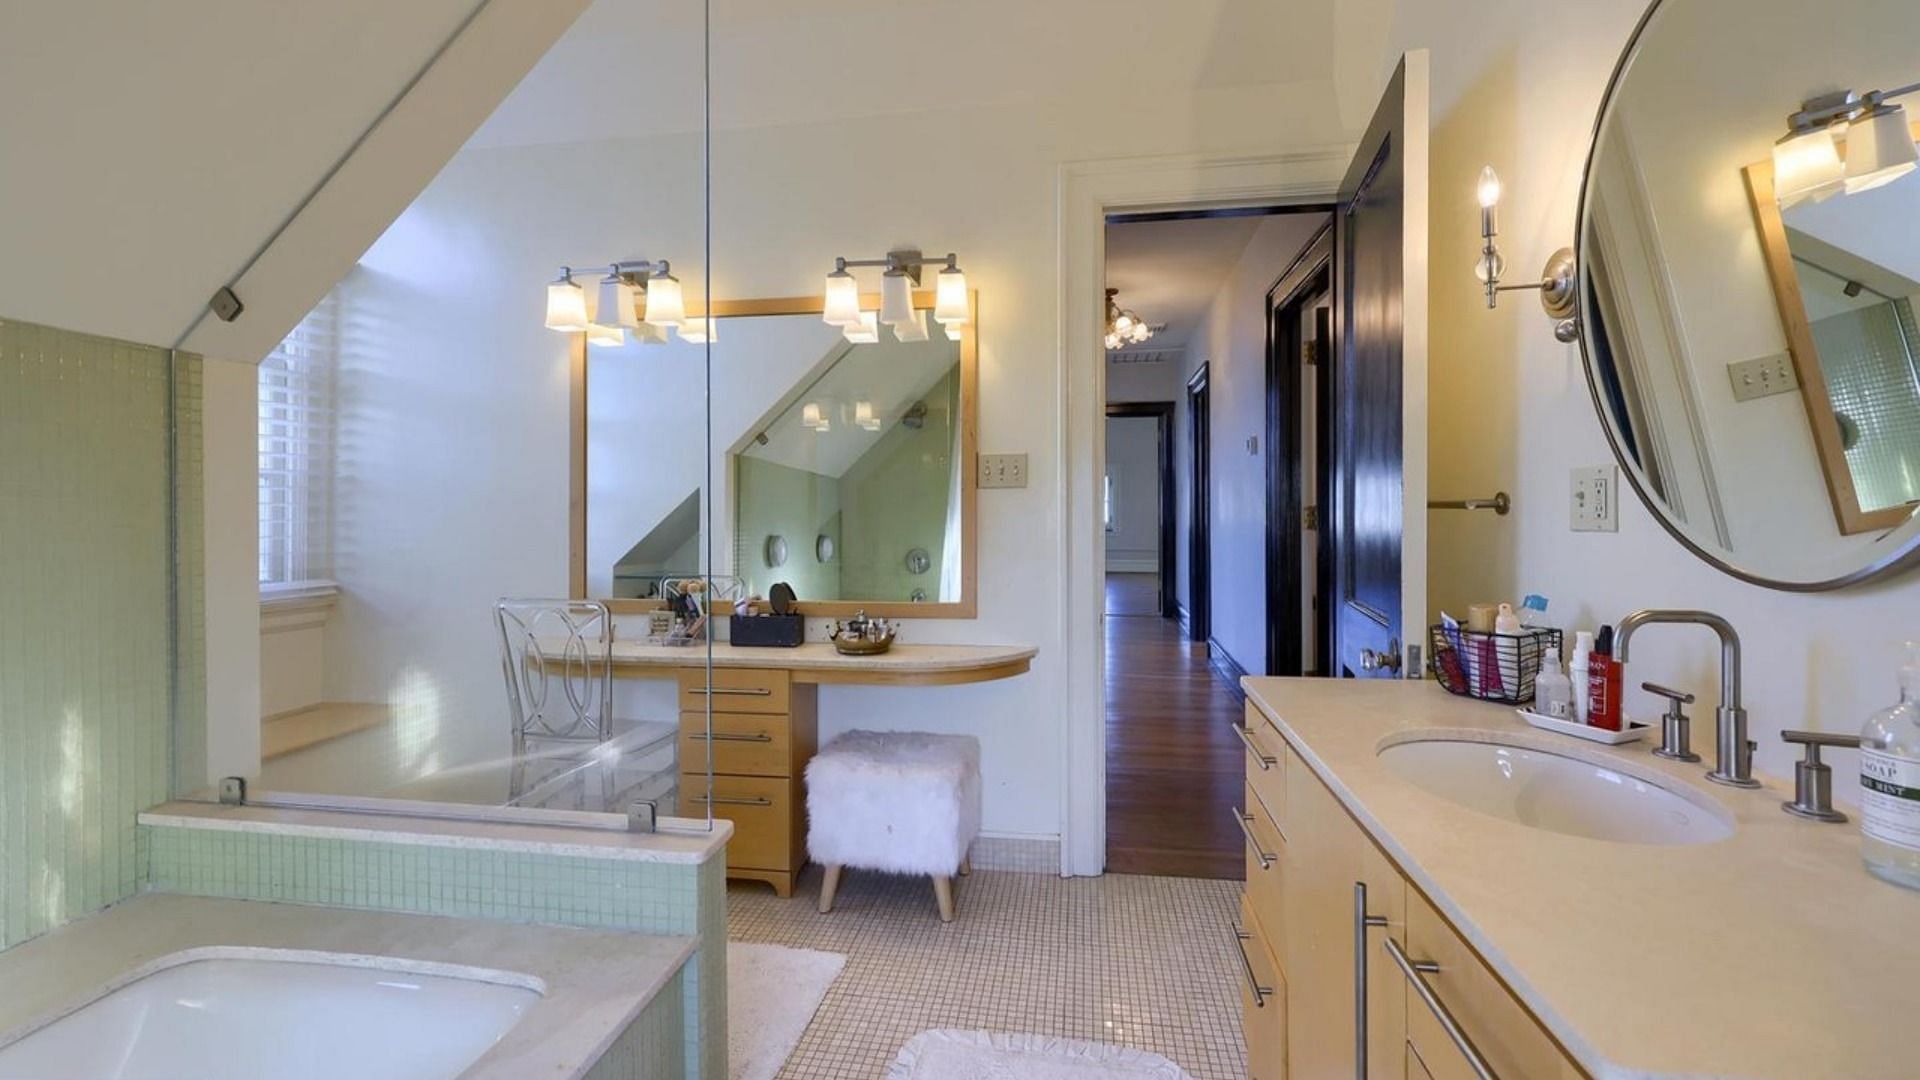 Luxury bath with double vanity, tile floors, travertine, tile shower, and tub (Image via Redfin)